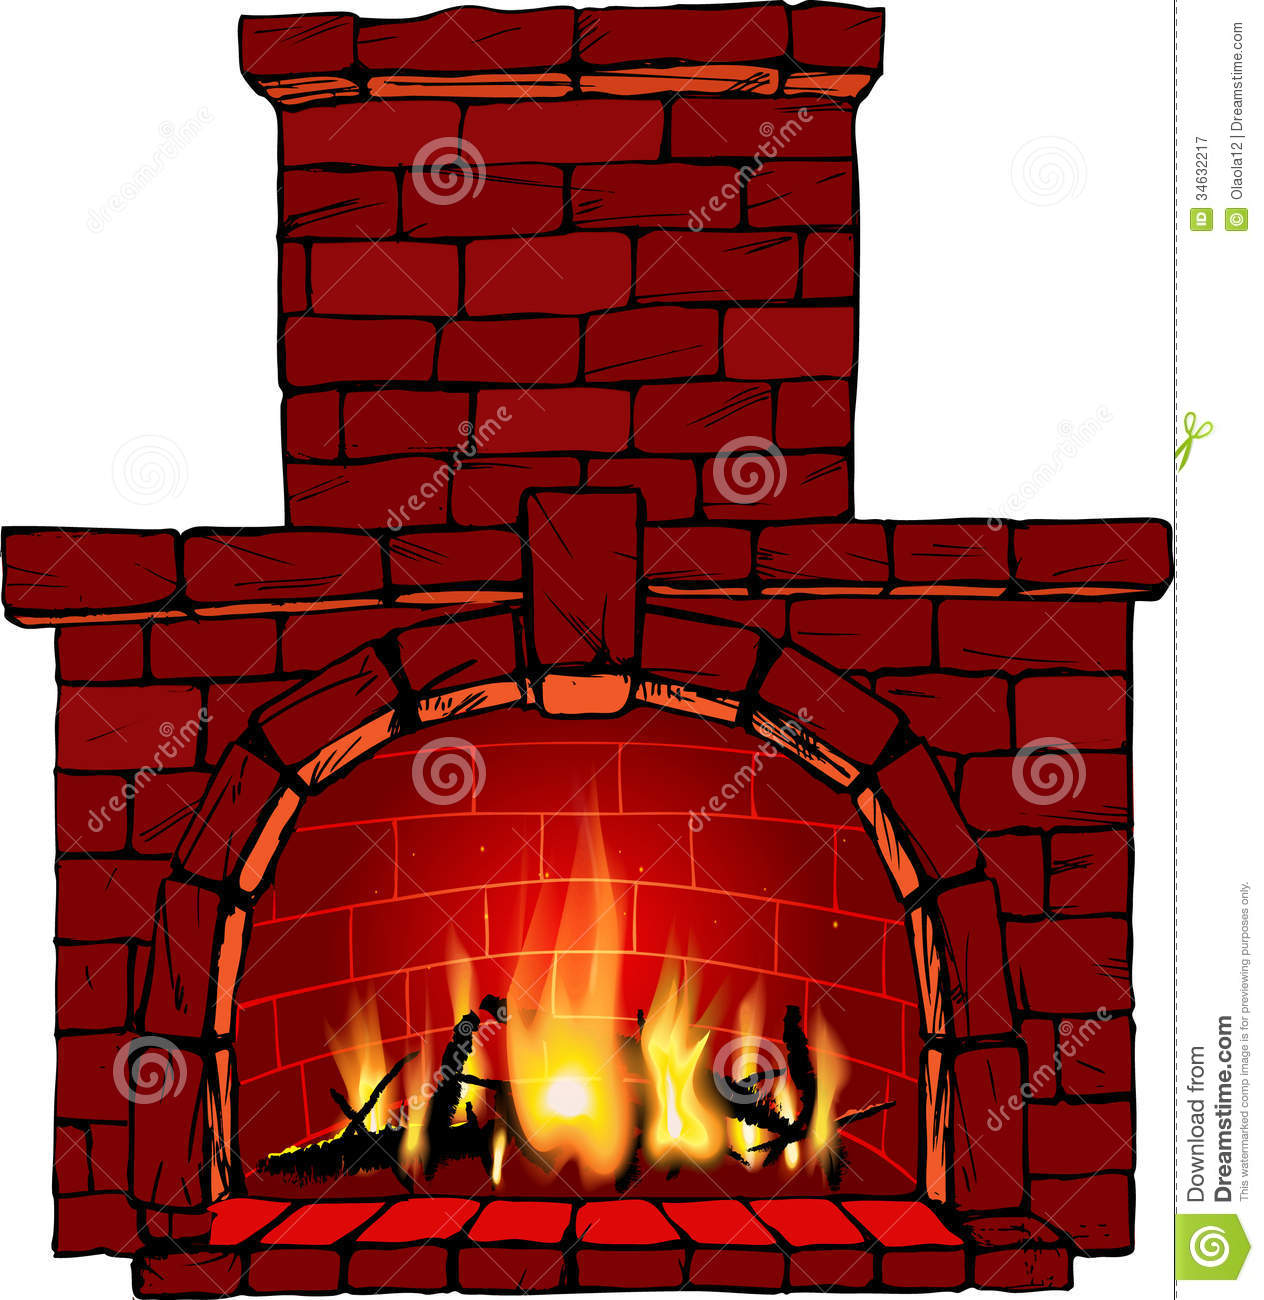 fireplace: Fireplace in Chris